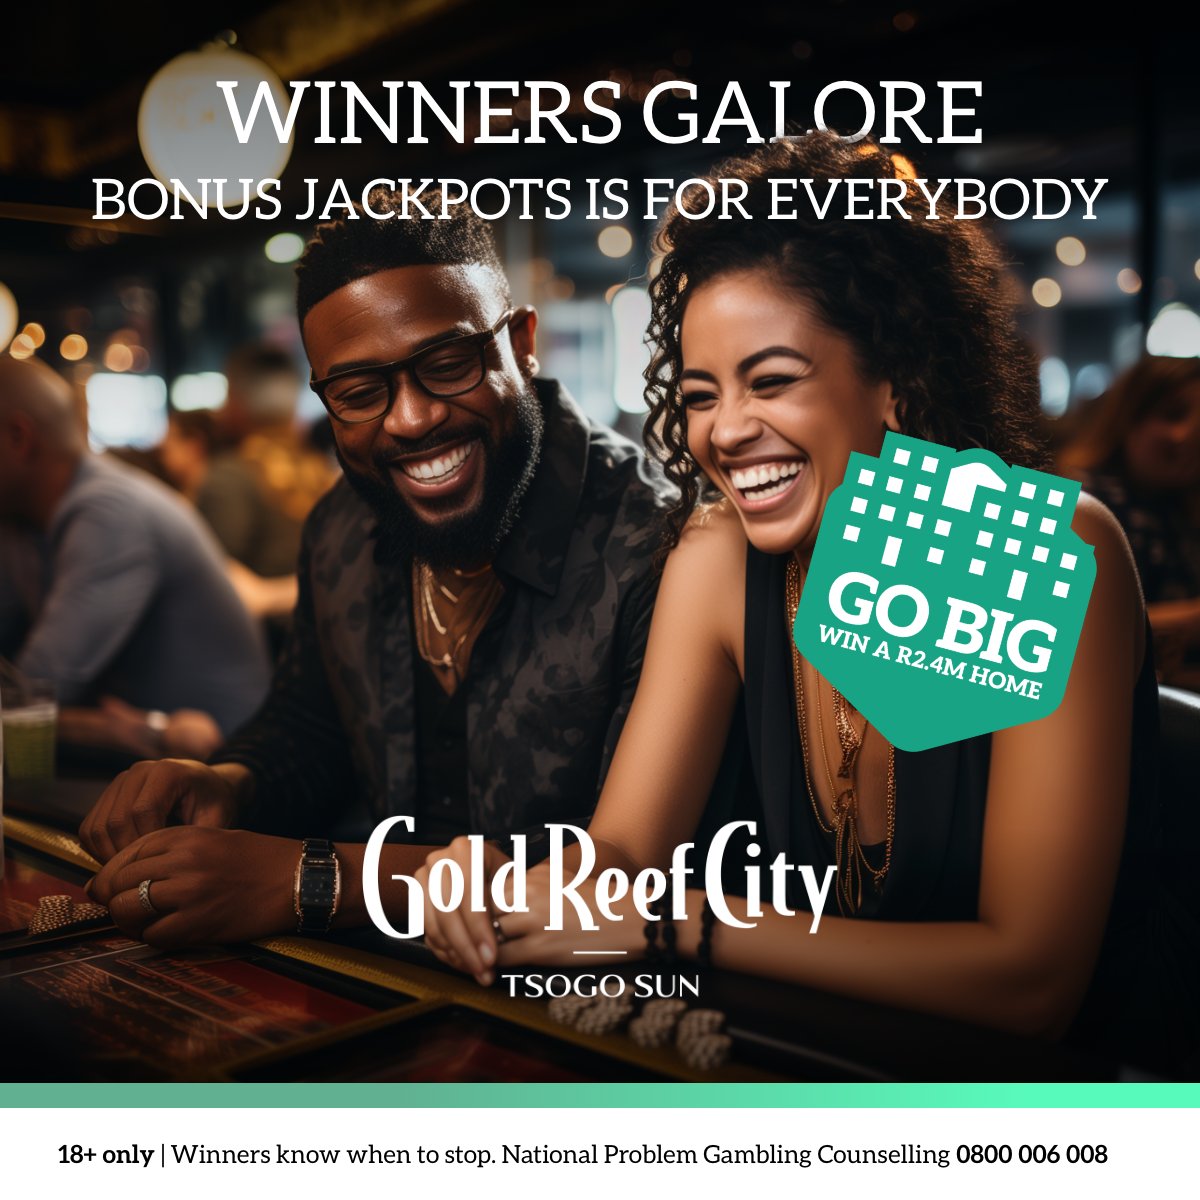 Bonus Jackpots is on tonight and everybody benefits! Q-K-A Rewards cardholders can be random winners if they're actively playing on the winning bank of machines or having a bet at the same table. bit.ly/486qYMH